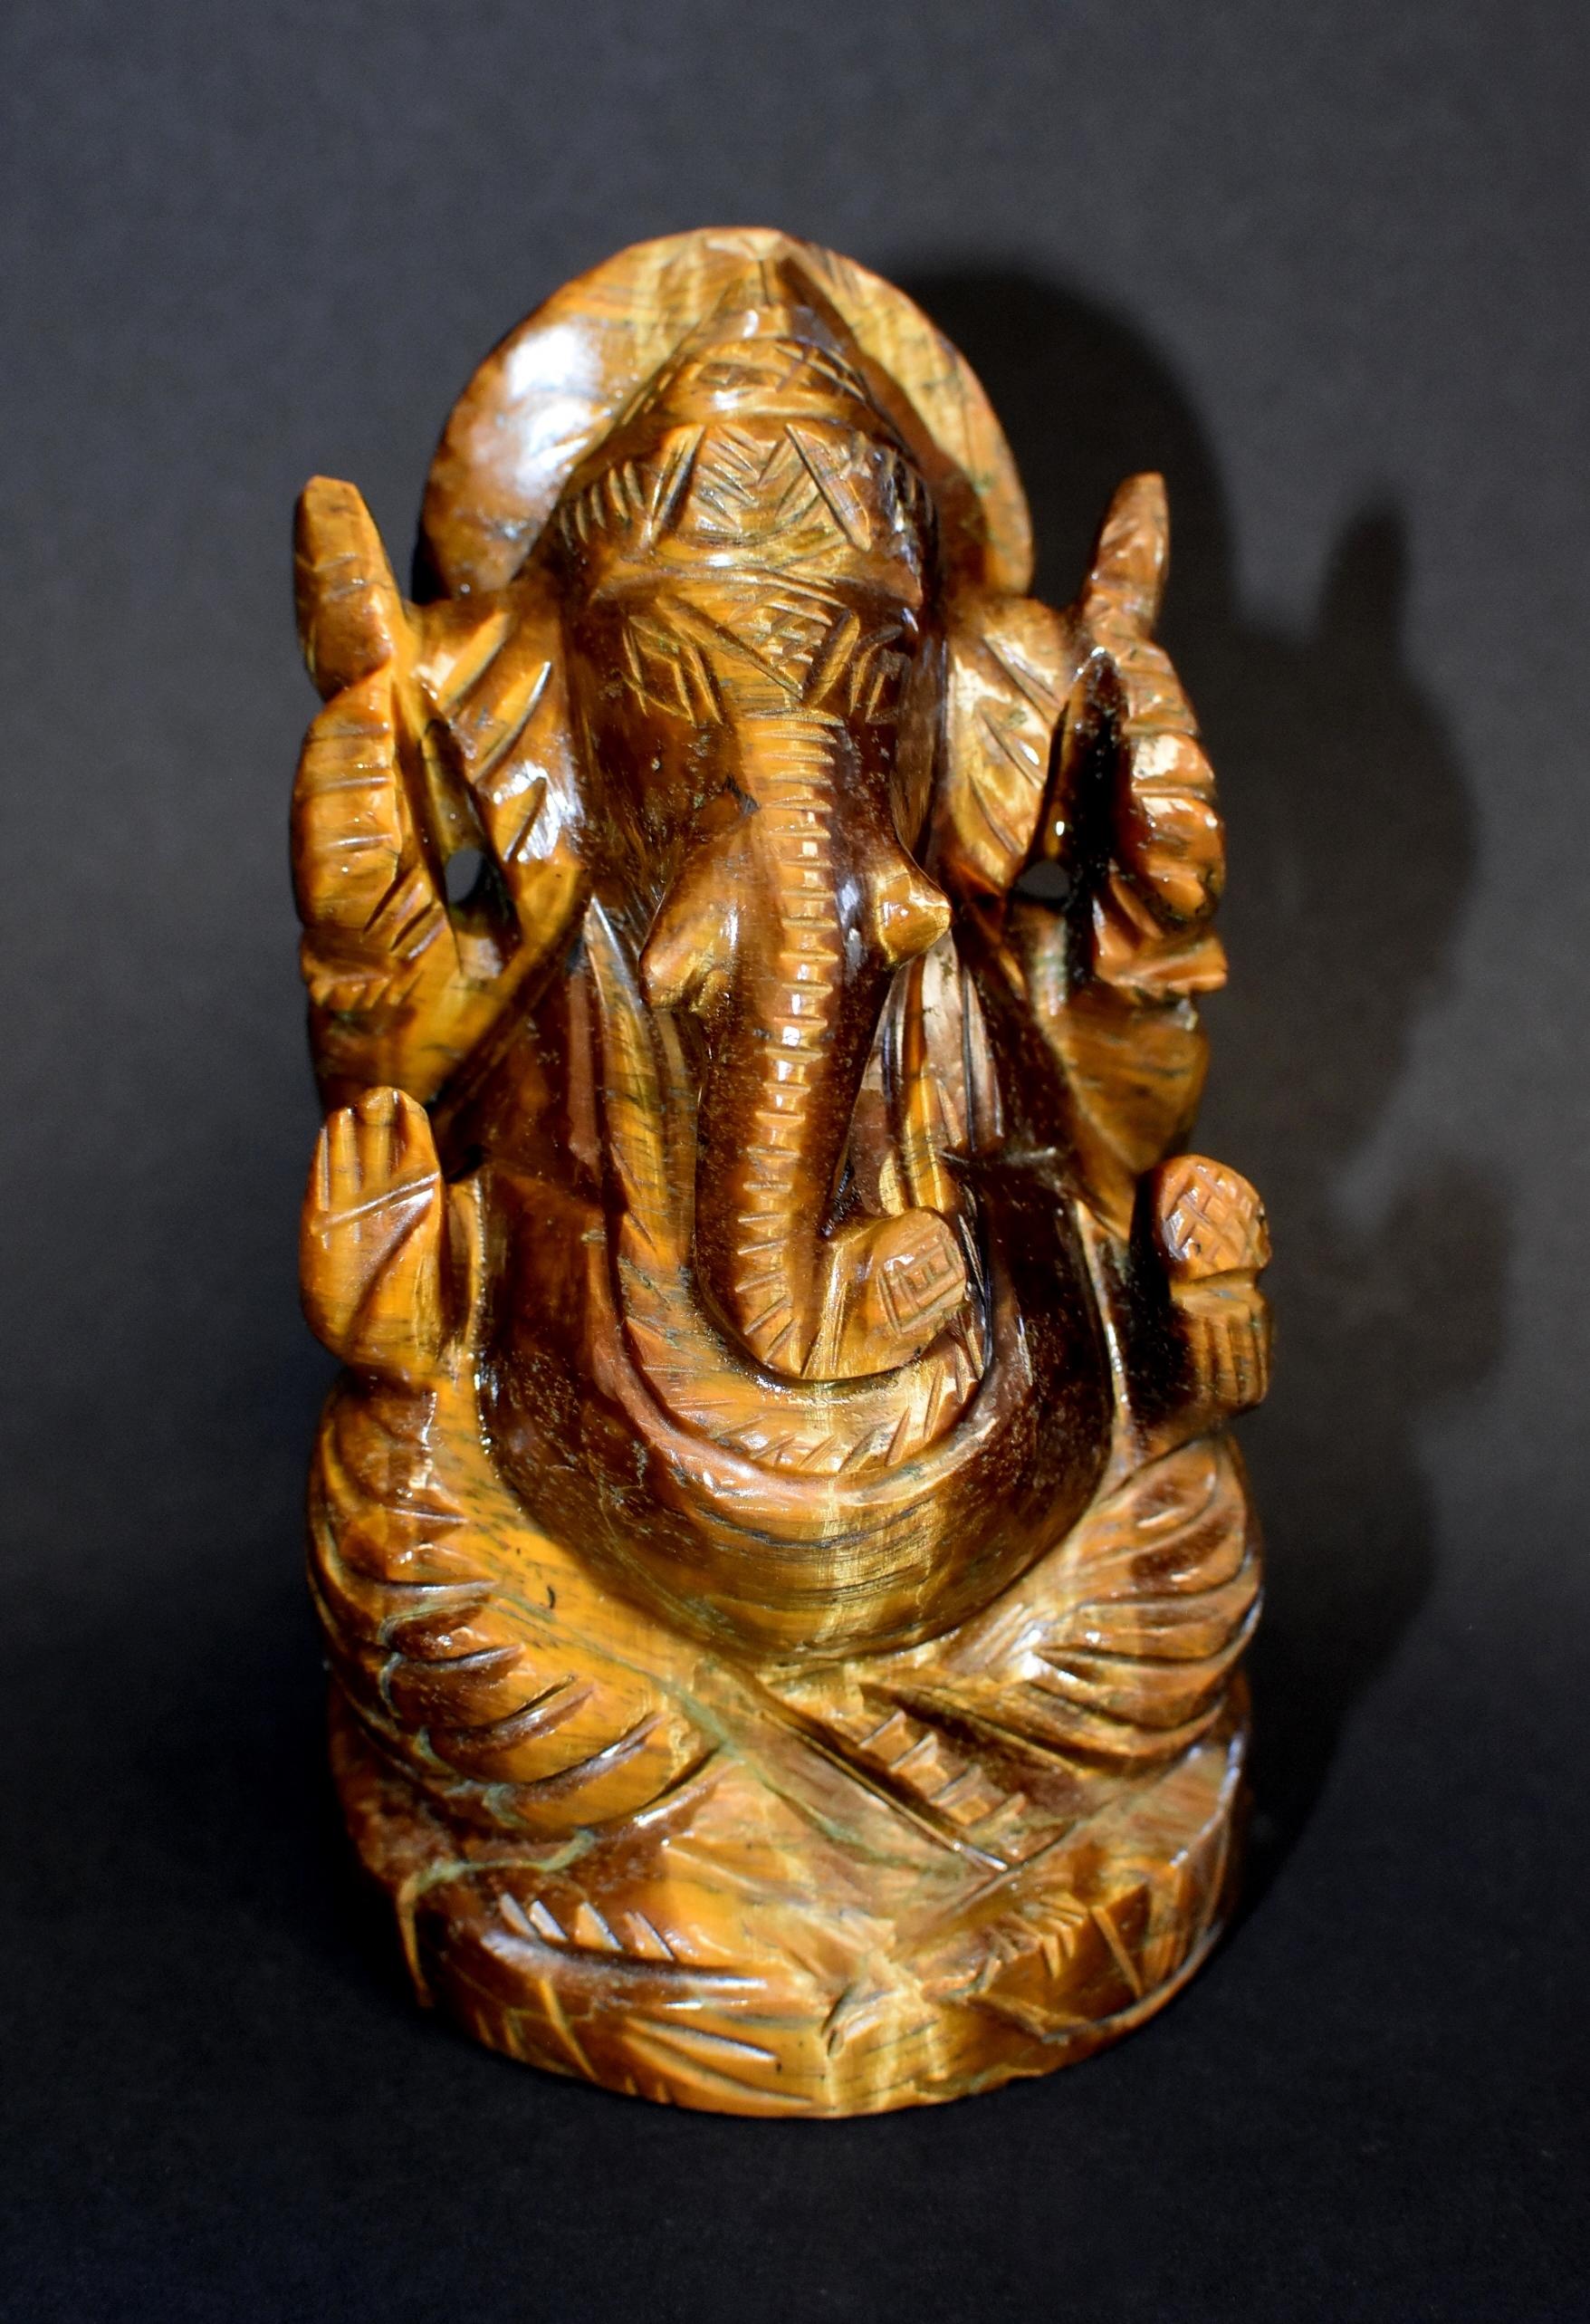 A beautiful natural tiger's eye sculpture depicting the ganesh. This entire sculpture is made of one piece of the finest quality tiger's eye that weights 1 lb with fantastic iridescence. One of a kind. Tiger's eye is believed to enable clear vision